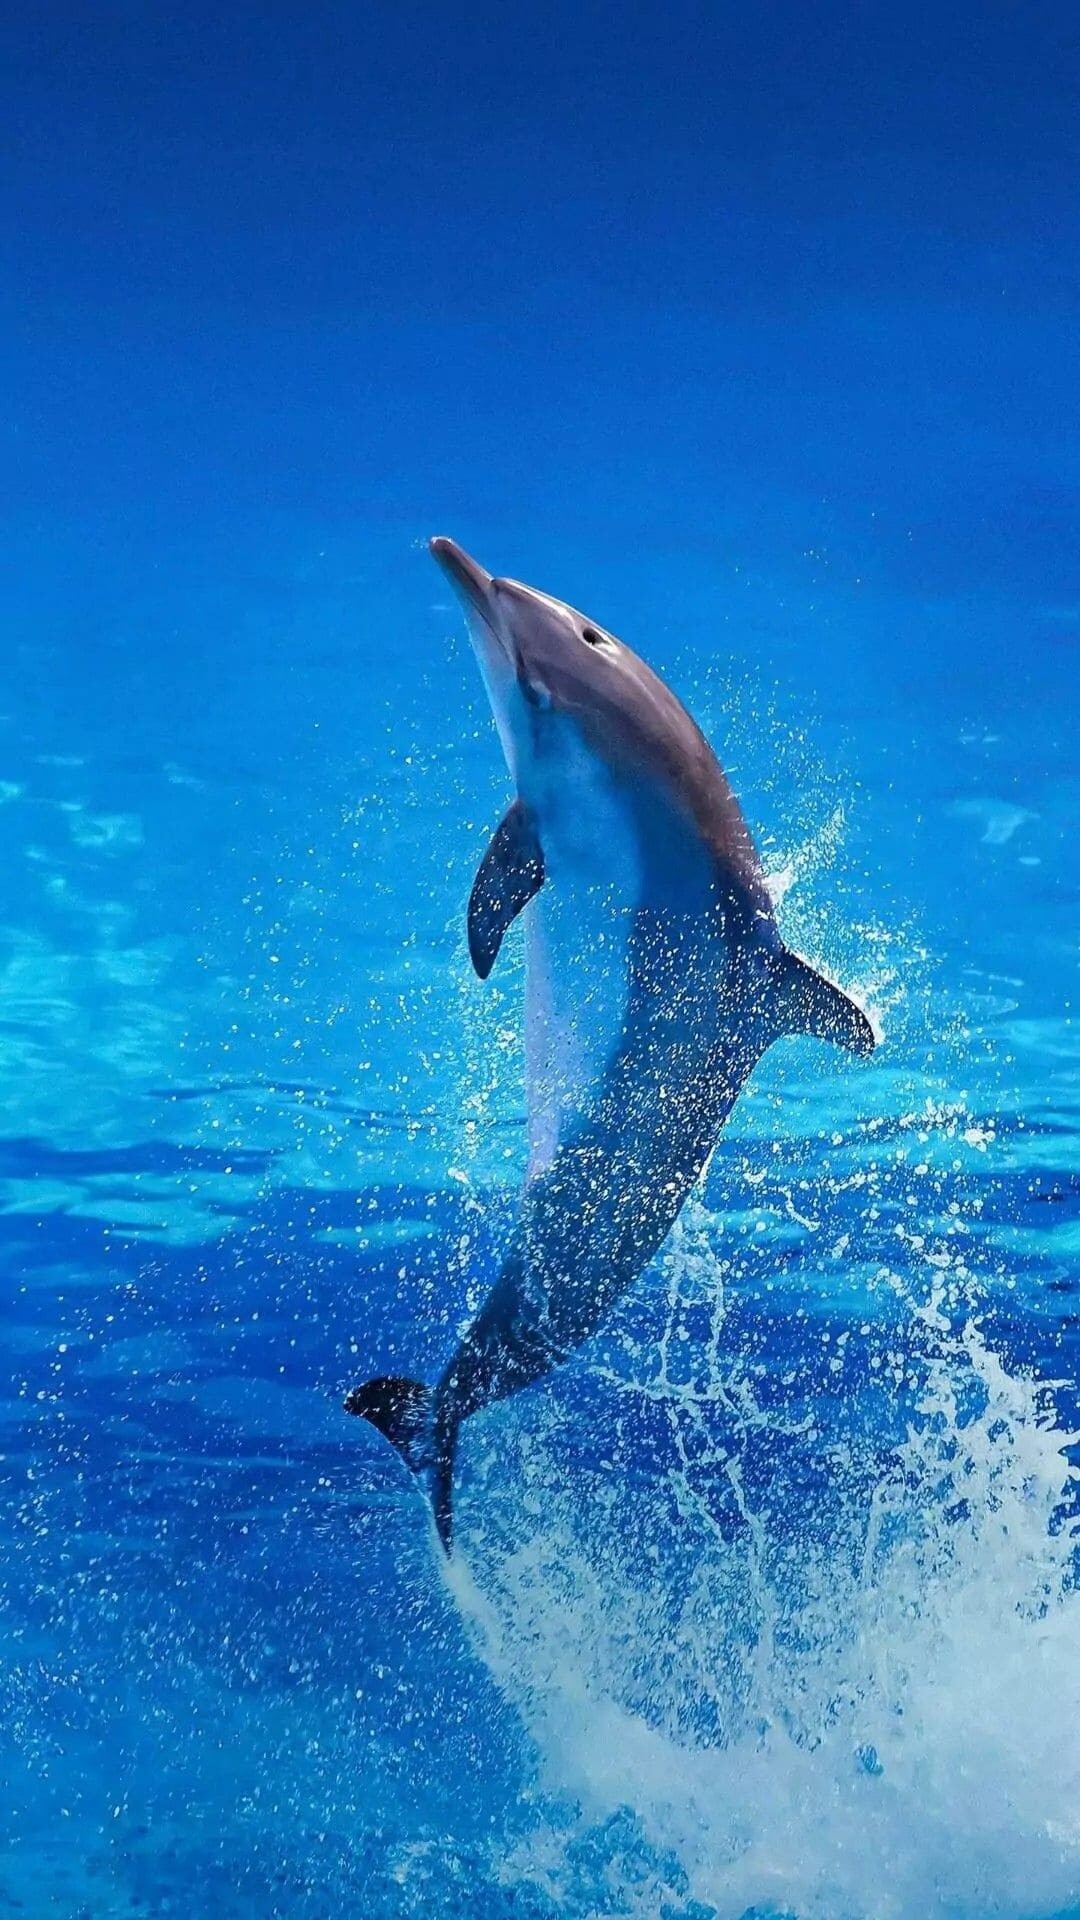 Dolphin: Dolphins are an increasingly popular choice of animal-assisted therapy for psychological problems and developmental disabilities. 1080x1920 Full HD Wallpaper.